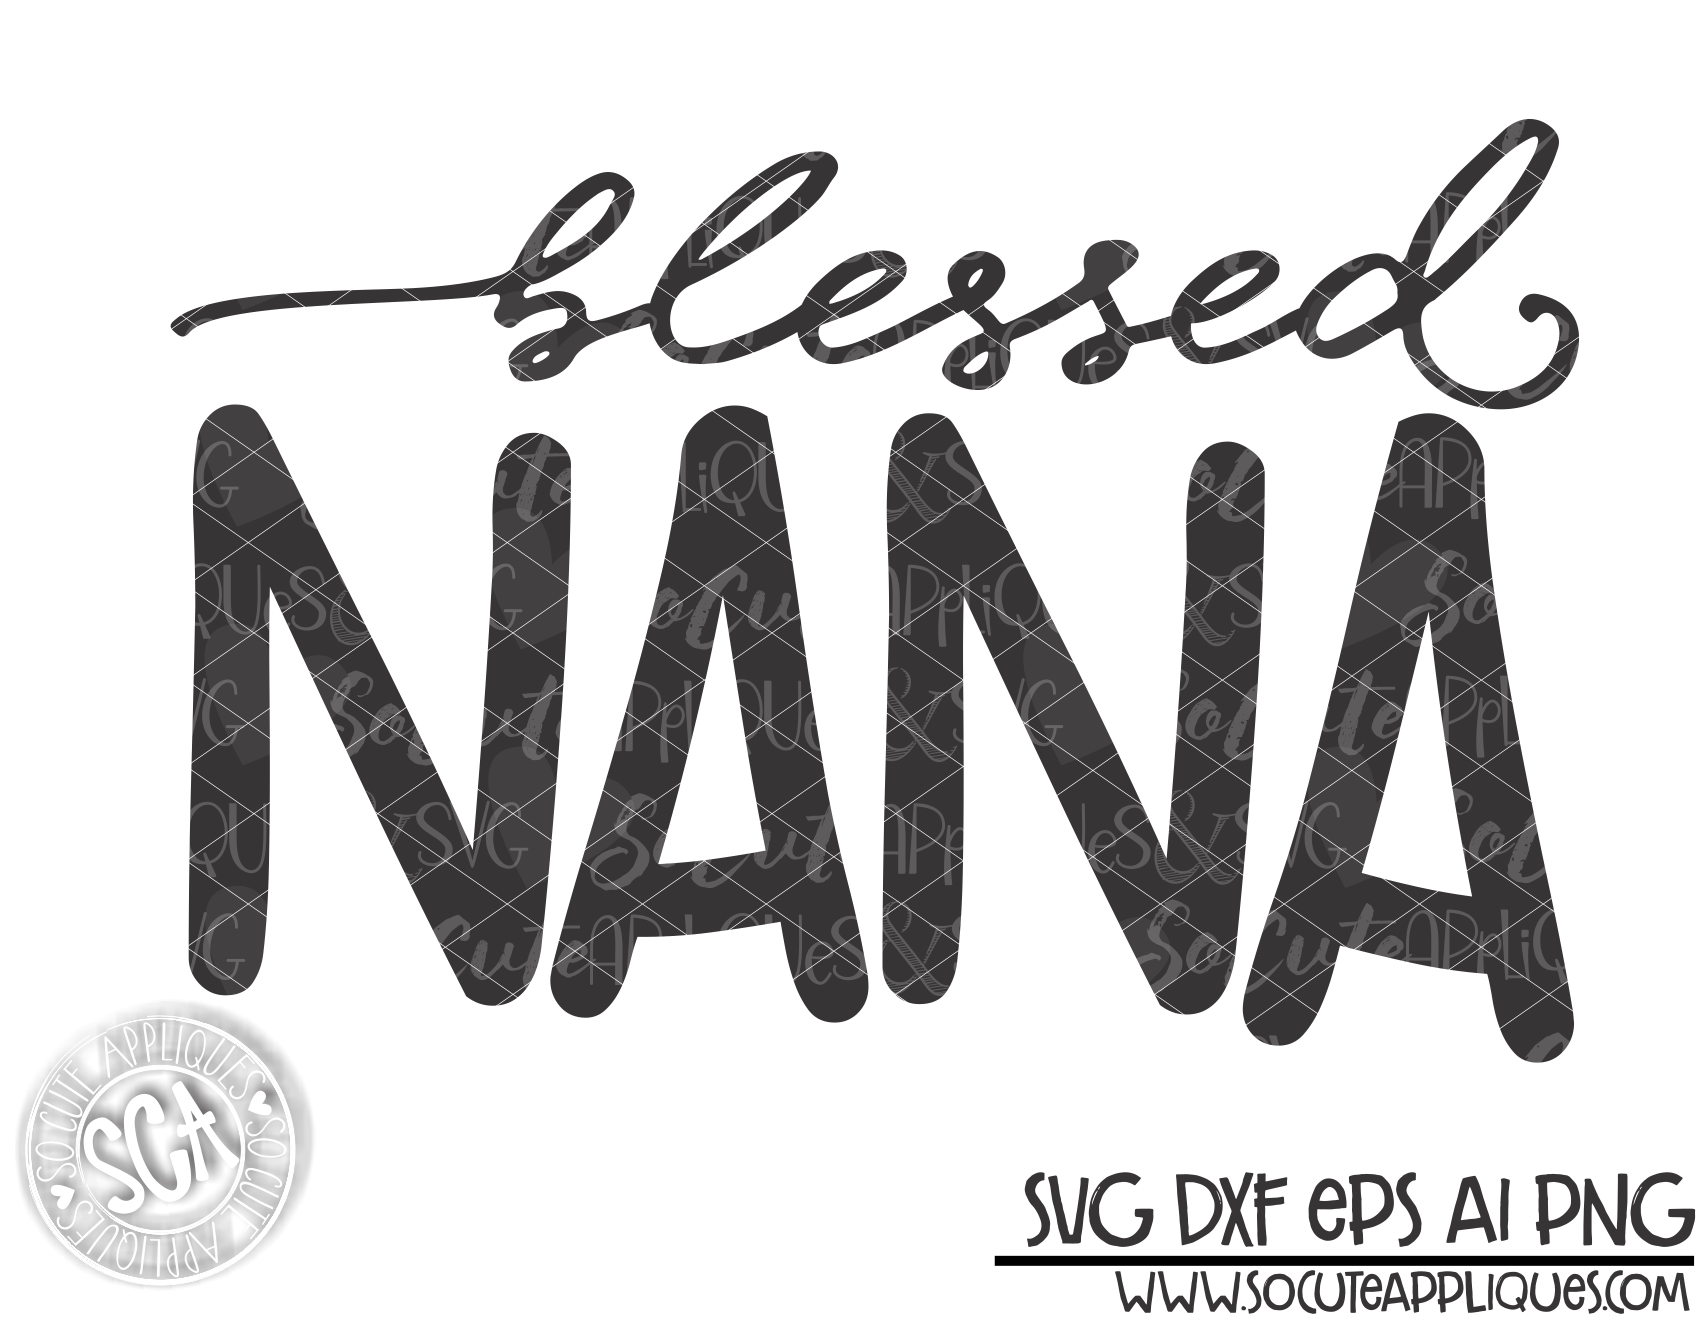 Free Free 159 Blessed Nana Svg Free SVG PNG EPS DXF File